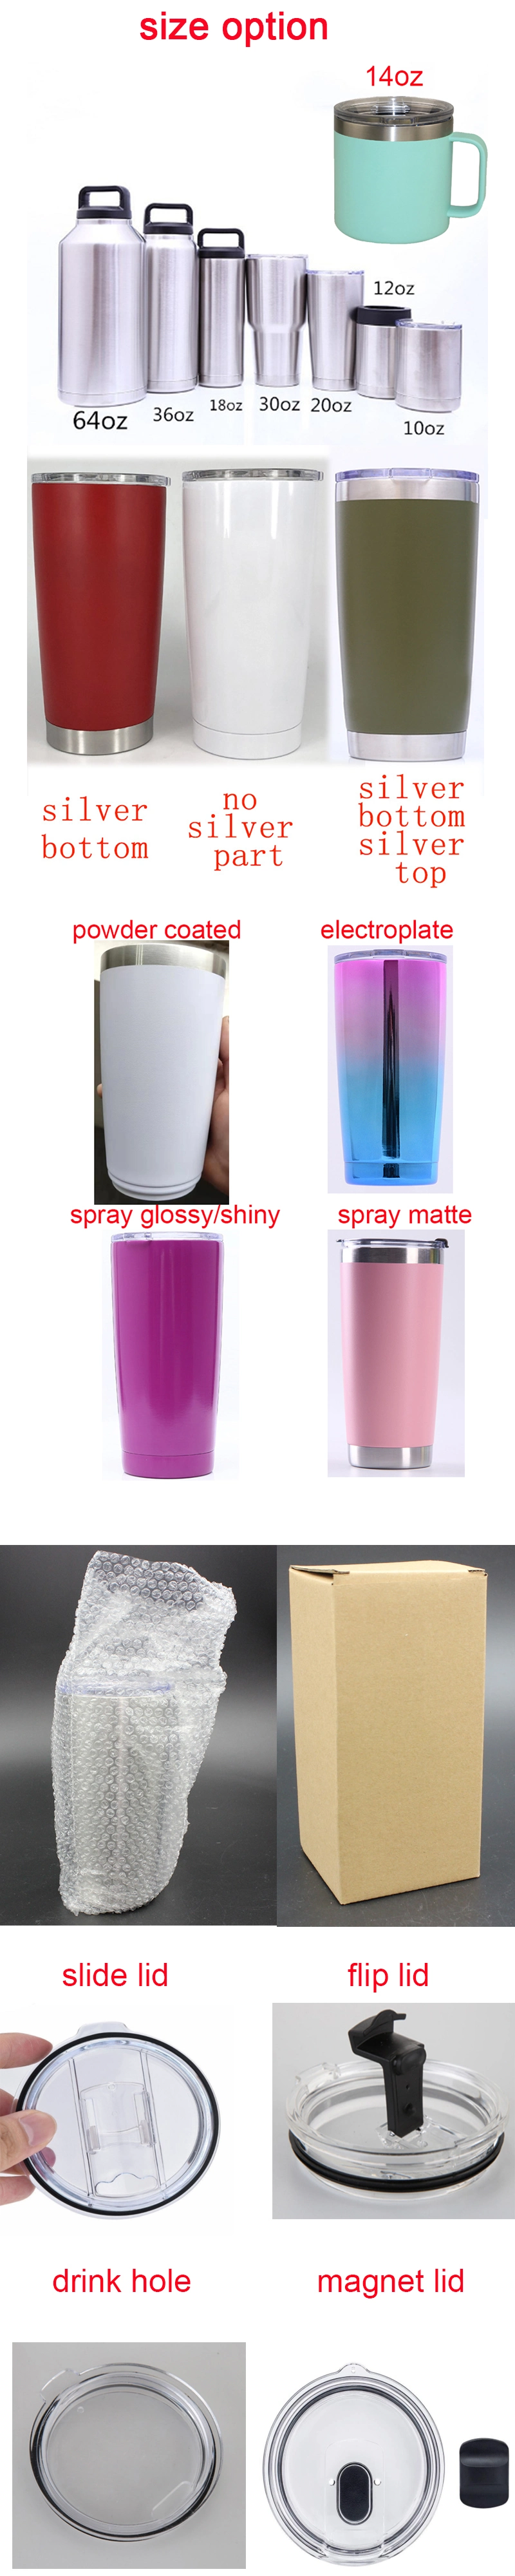 30oz Double Wall Insulated Stainless Steel Tumbler Leakproof Travel Mug Straw Slide Lid Chinayetiprice 20oz